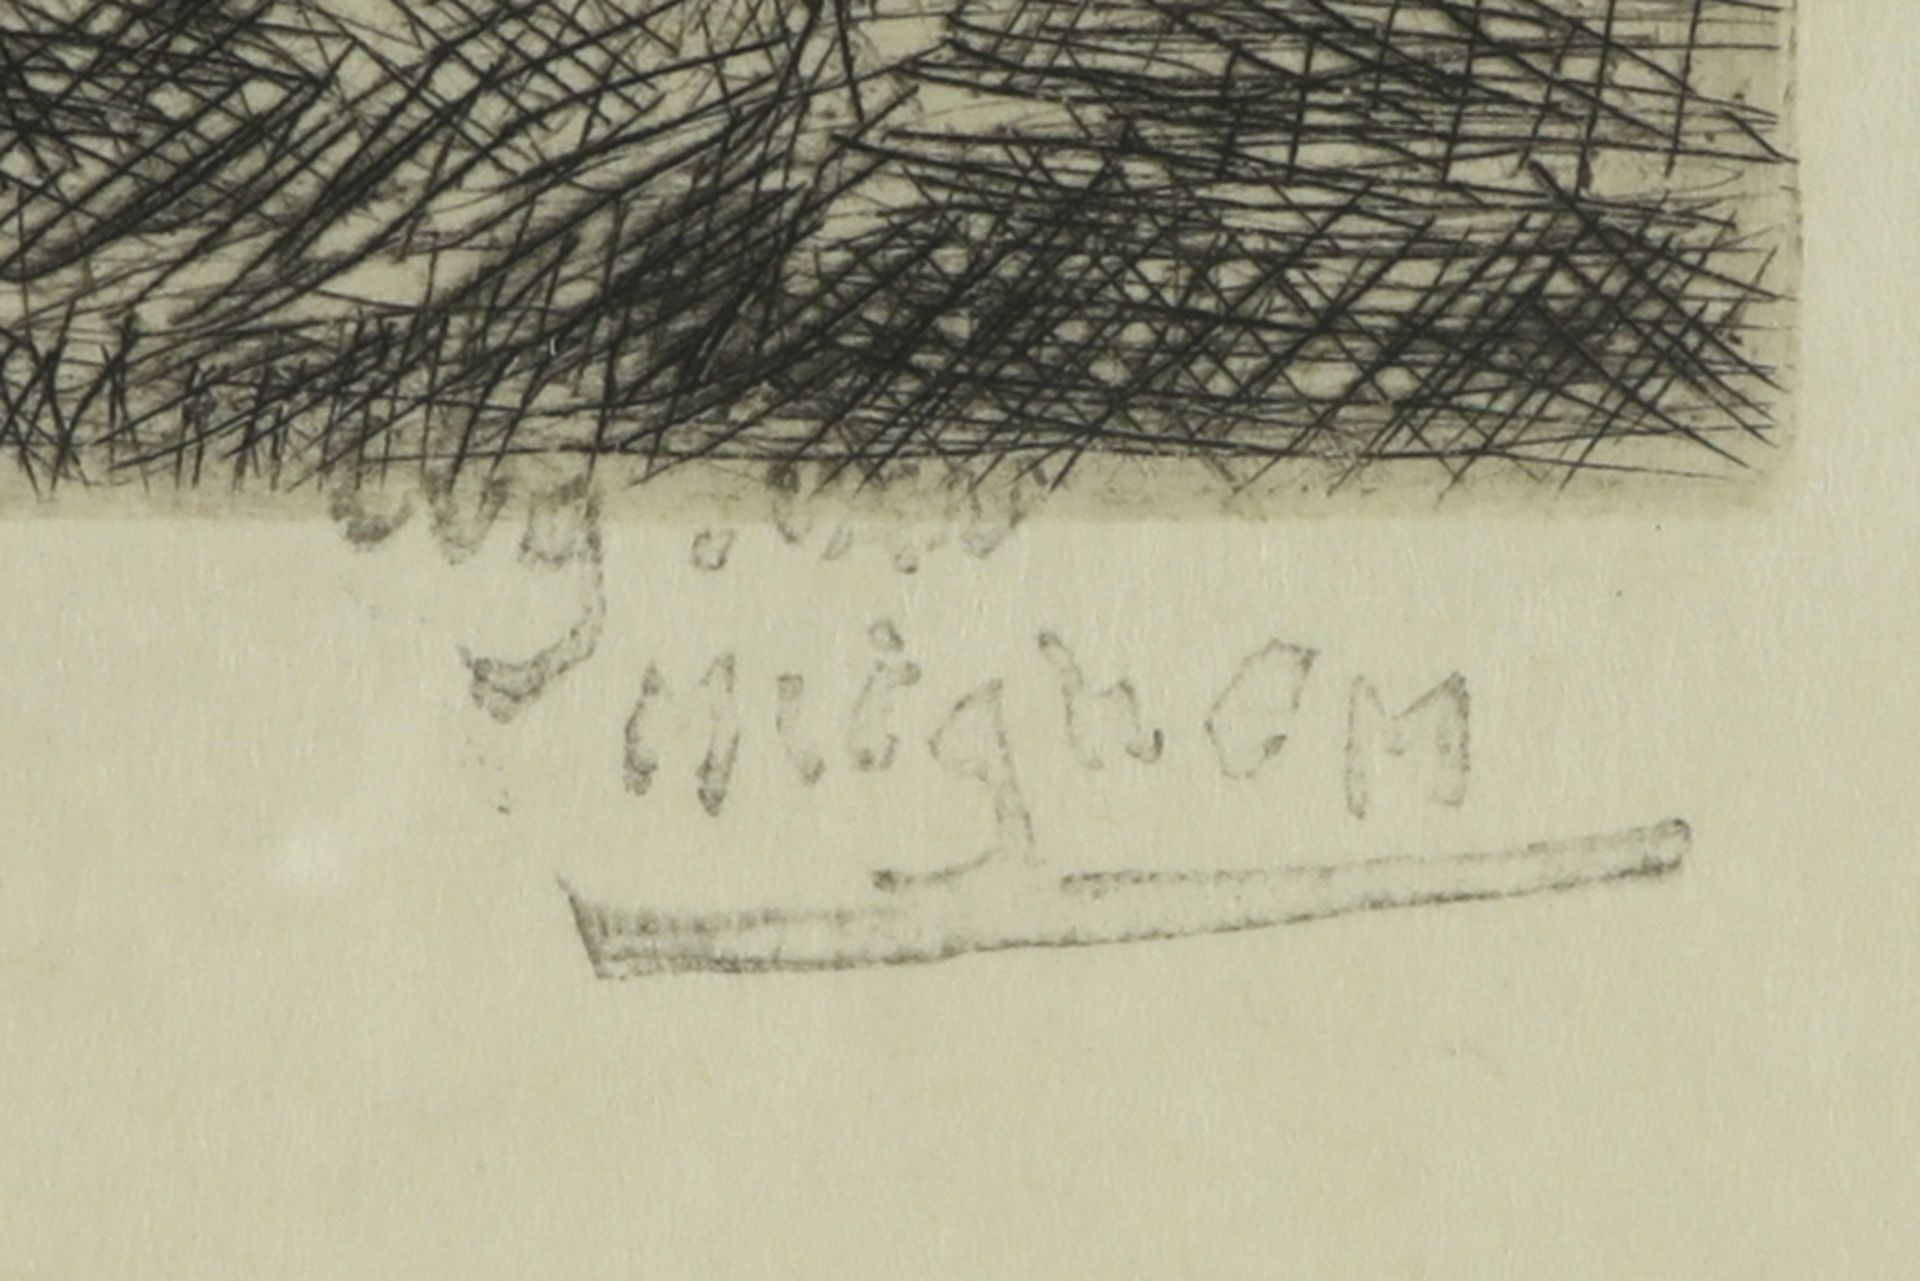 two early 20th Cent. Belgian etchings by Eugène Van Mieghem - with his name stamp || VAN MIEGHEM - Image 3 of 5